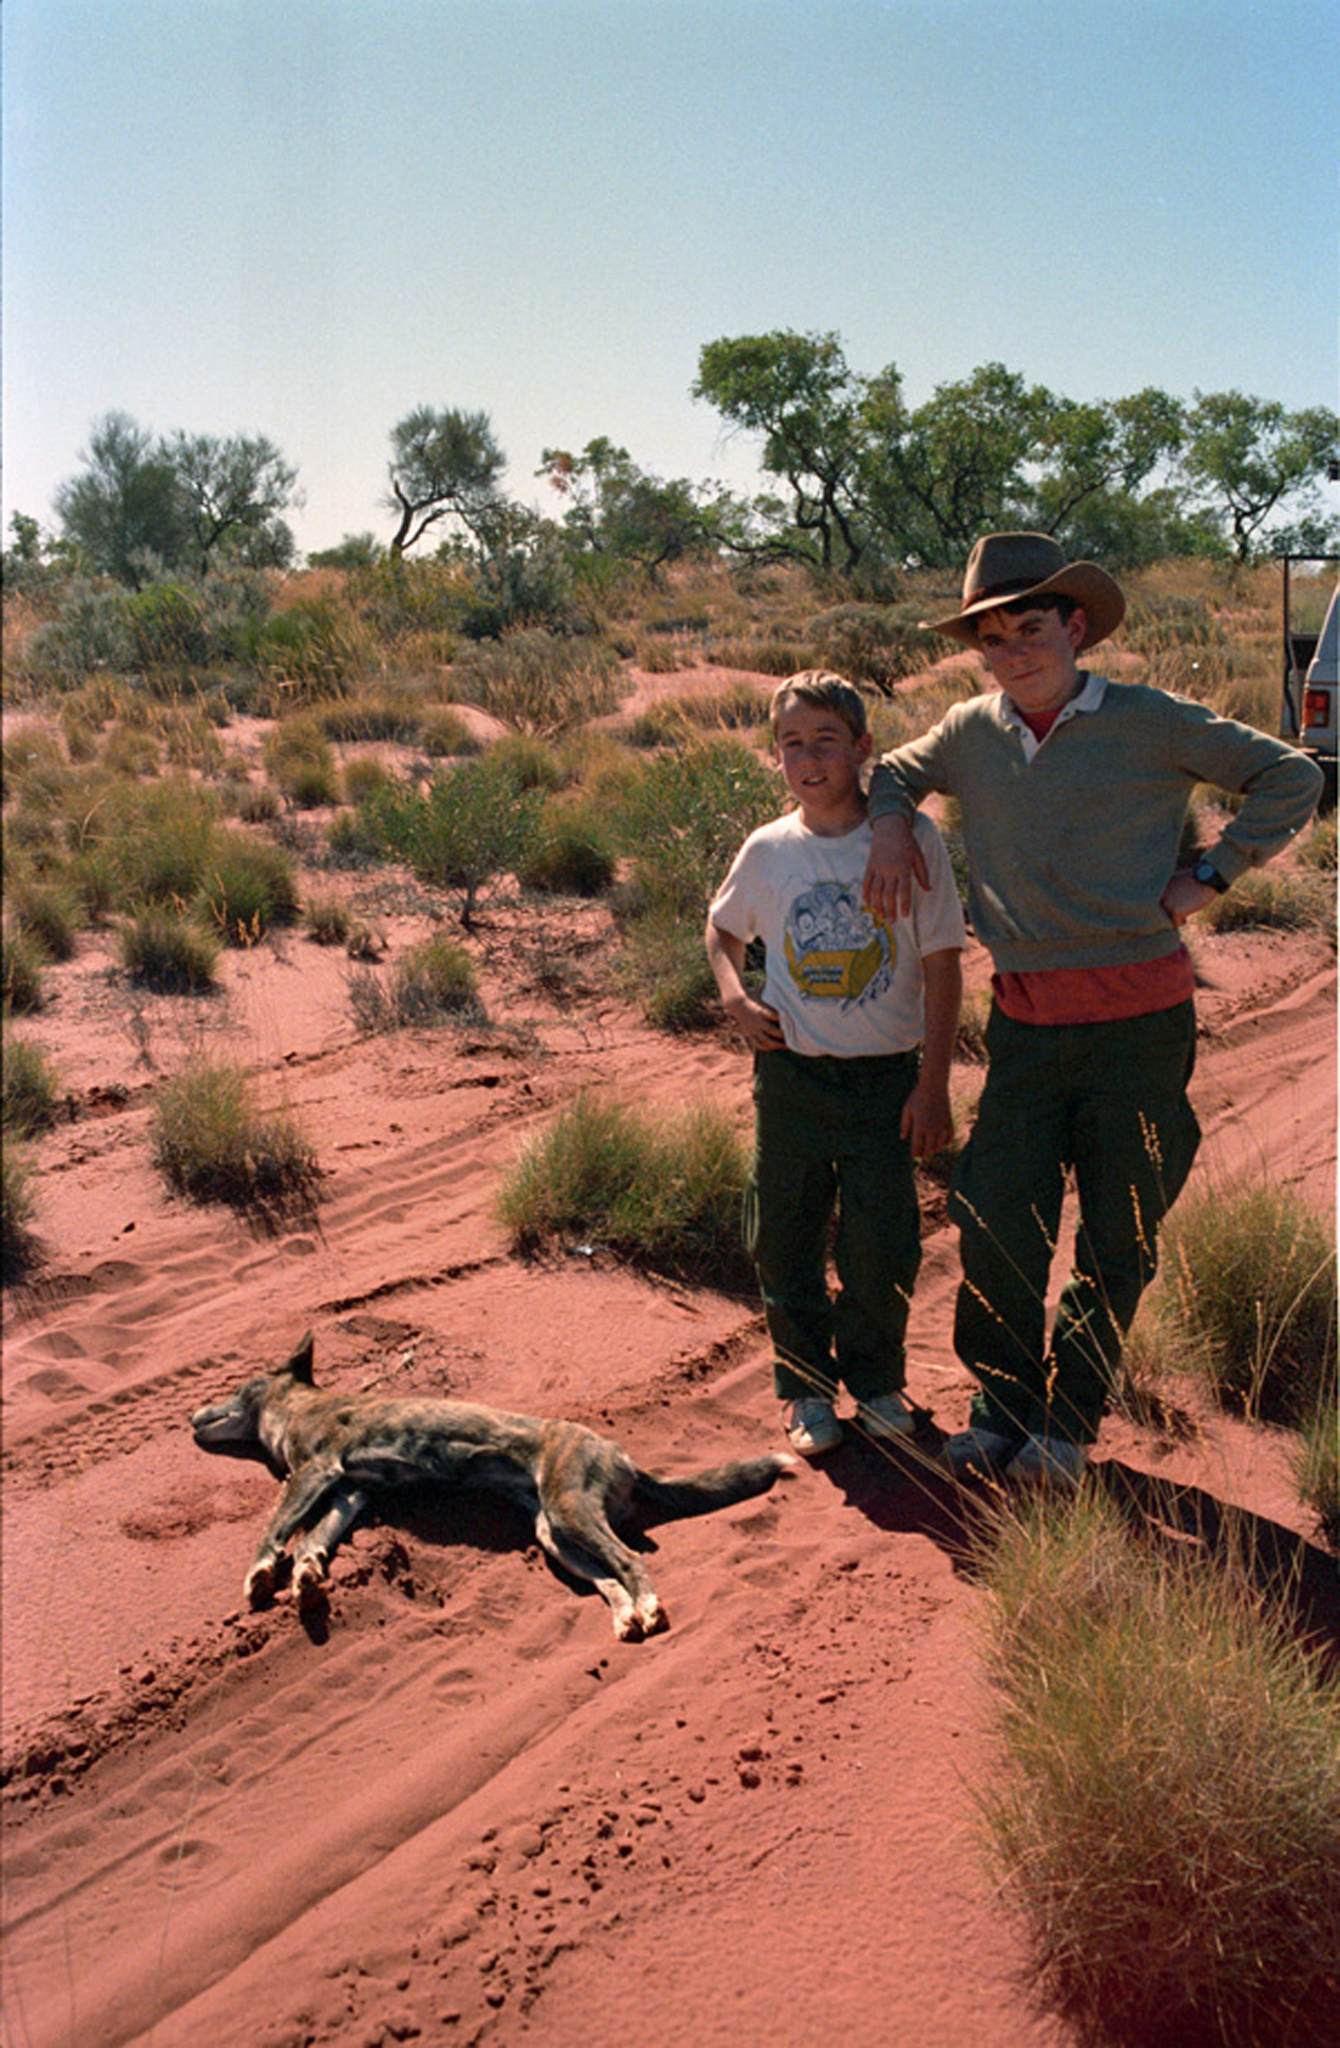 We didn't actually kill this dingo